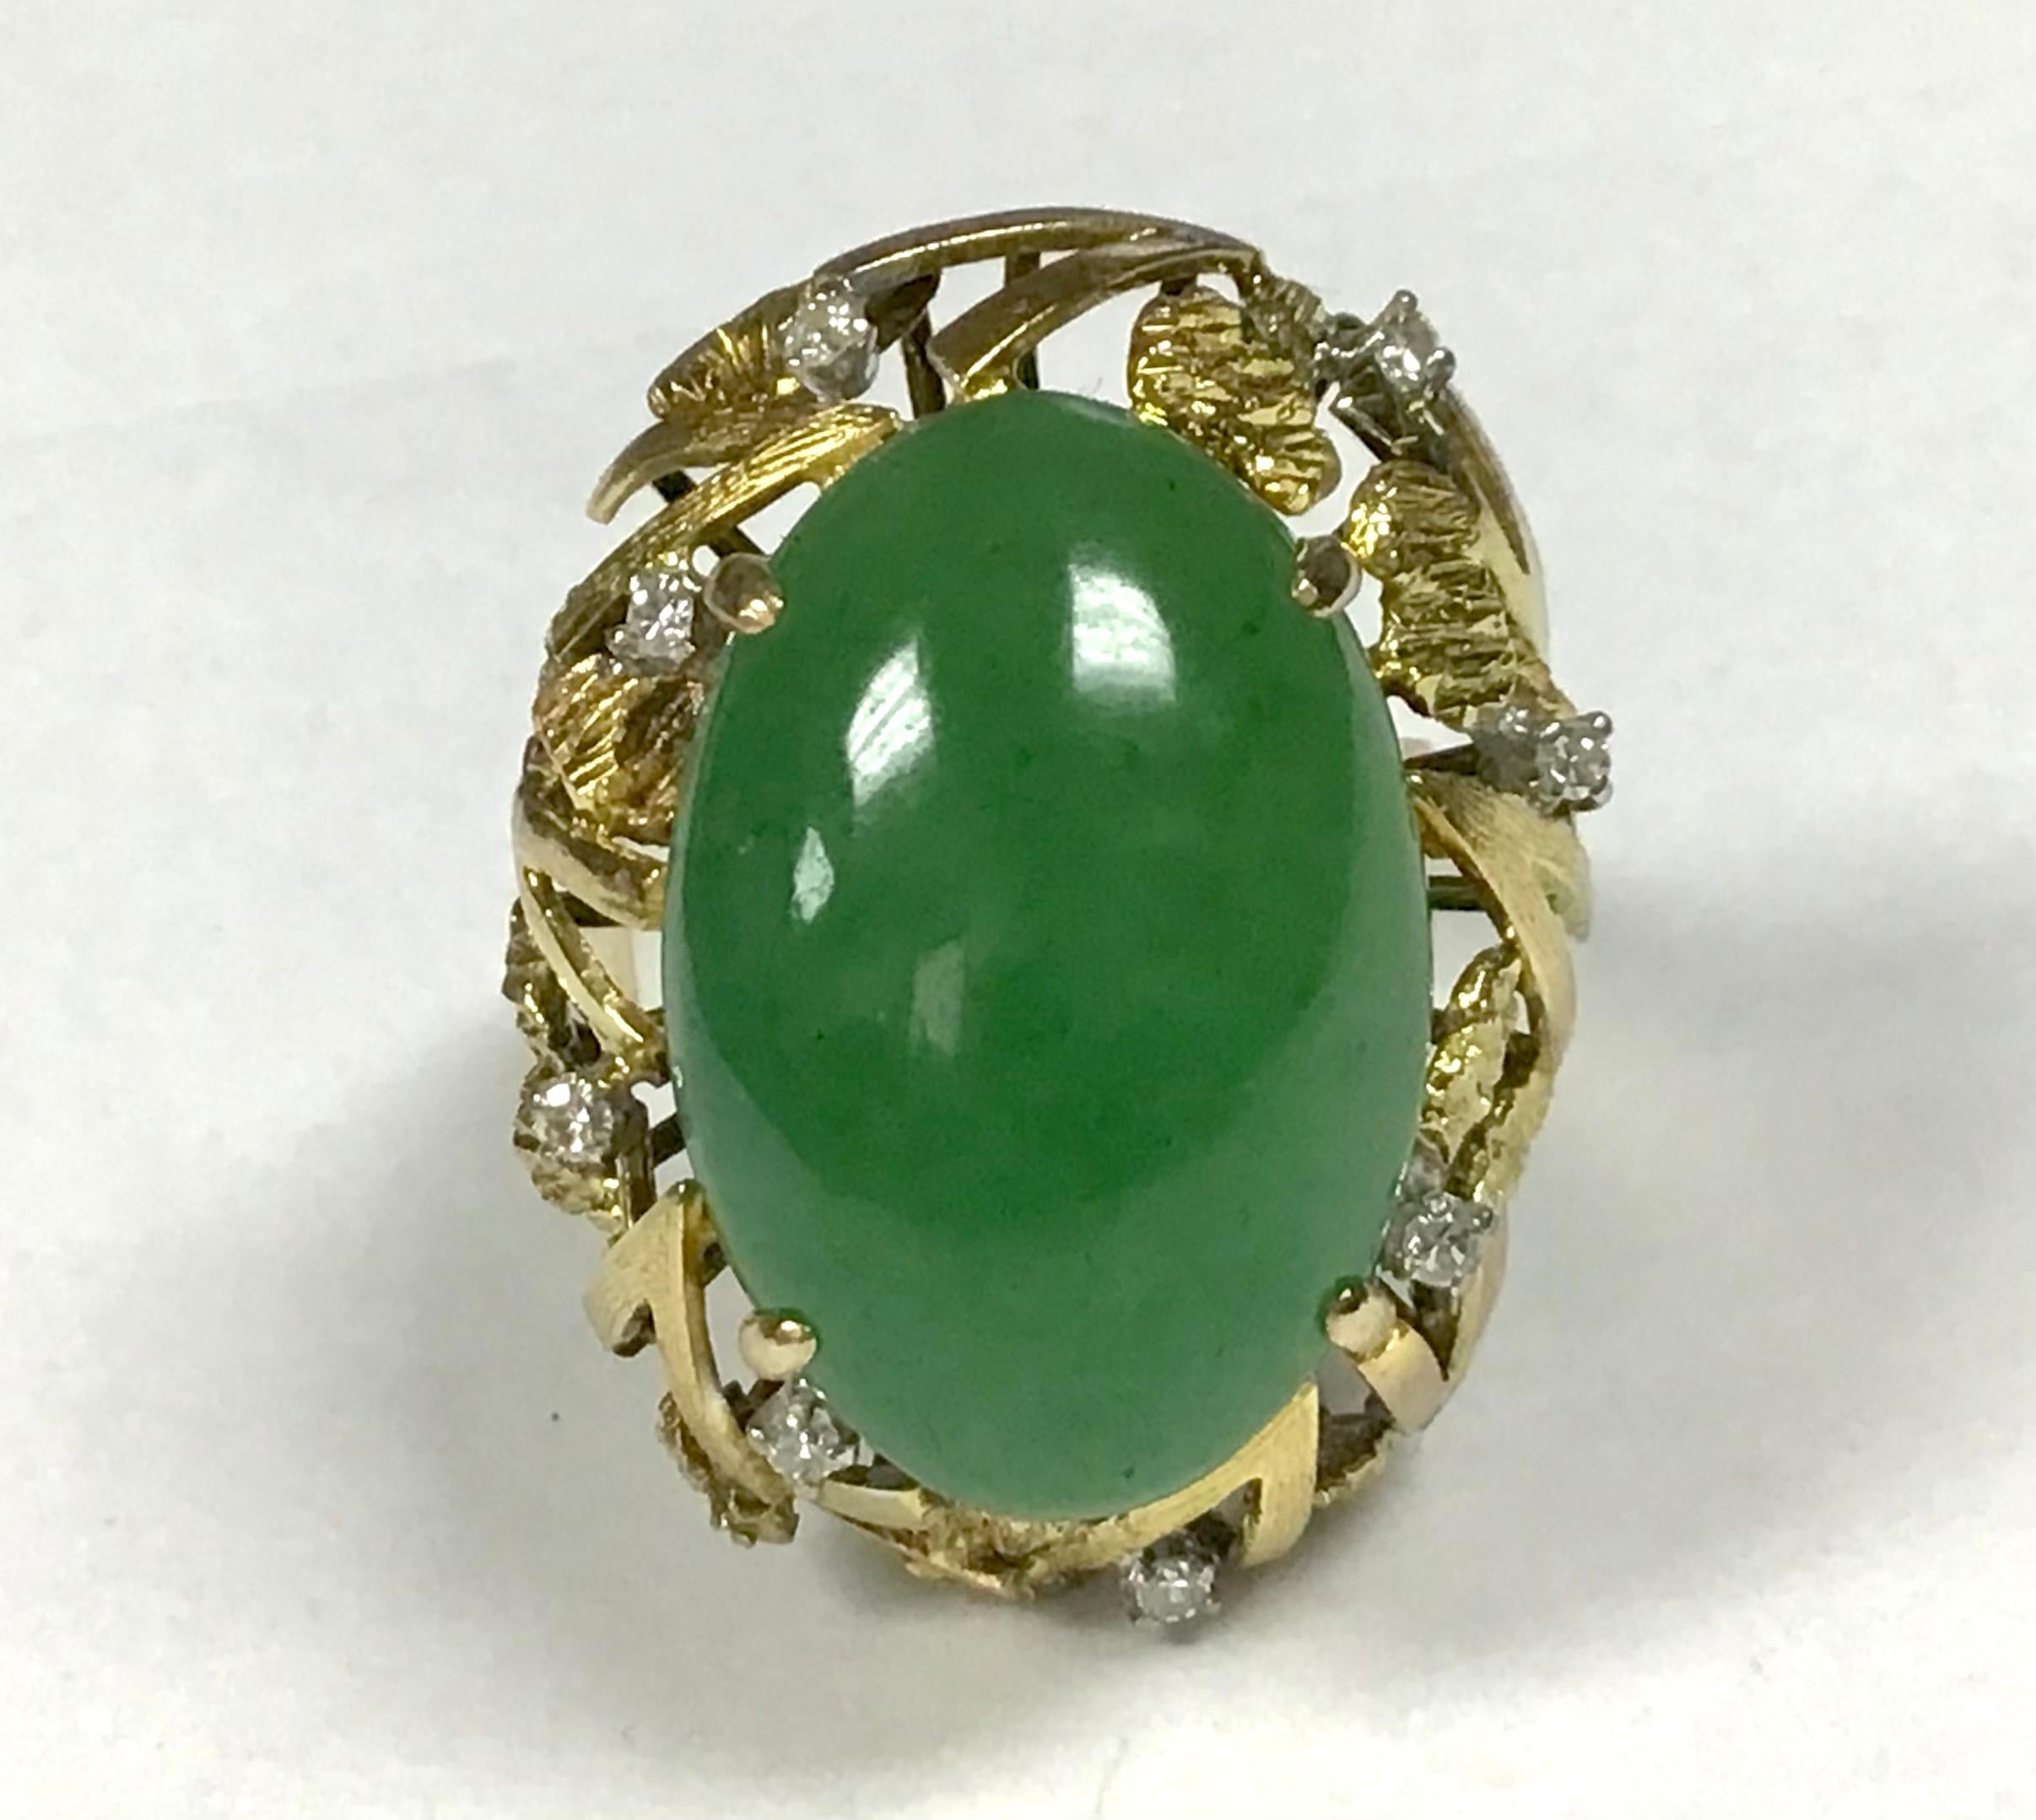 14k yellow gold jade and diamond cocktail ring, 11.00 Grams TW. Approximately 10 Carats.
Tested 14k.  Approximate size 4.5.